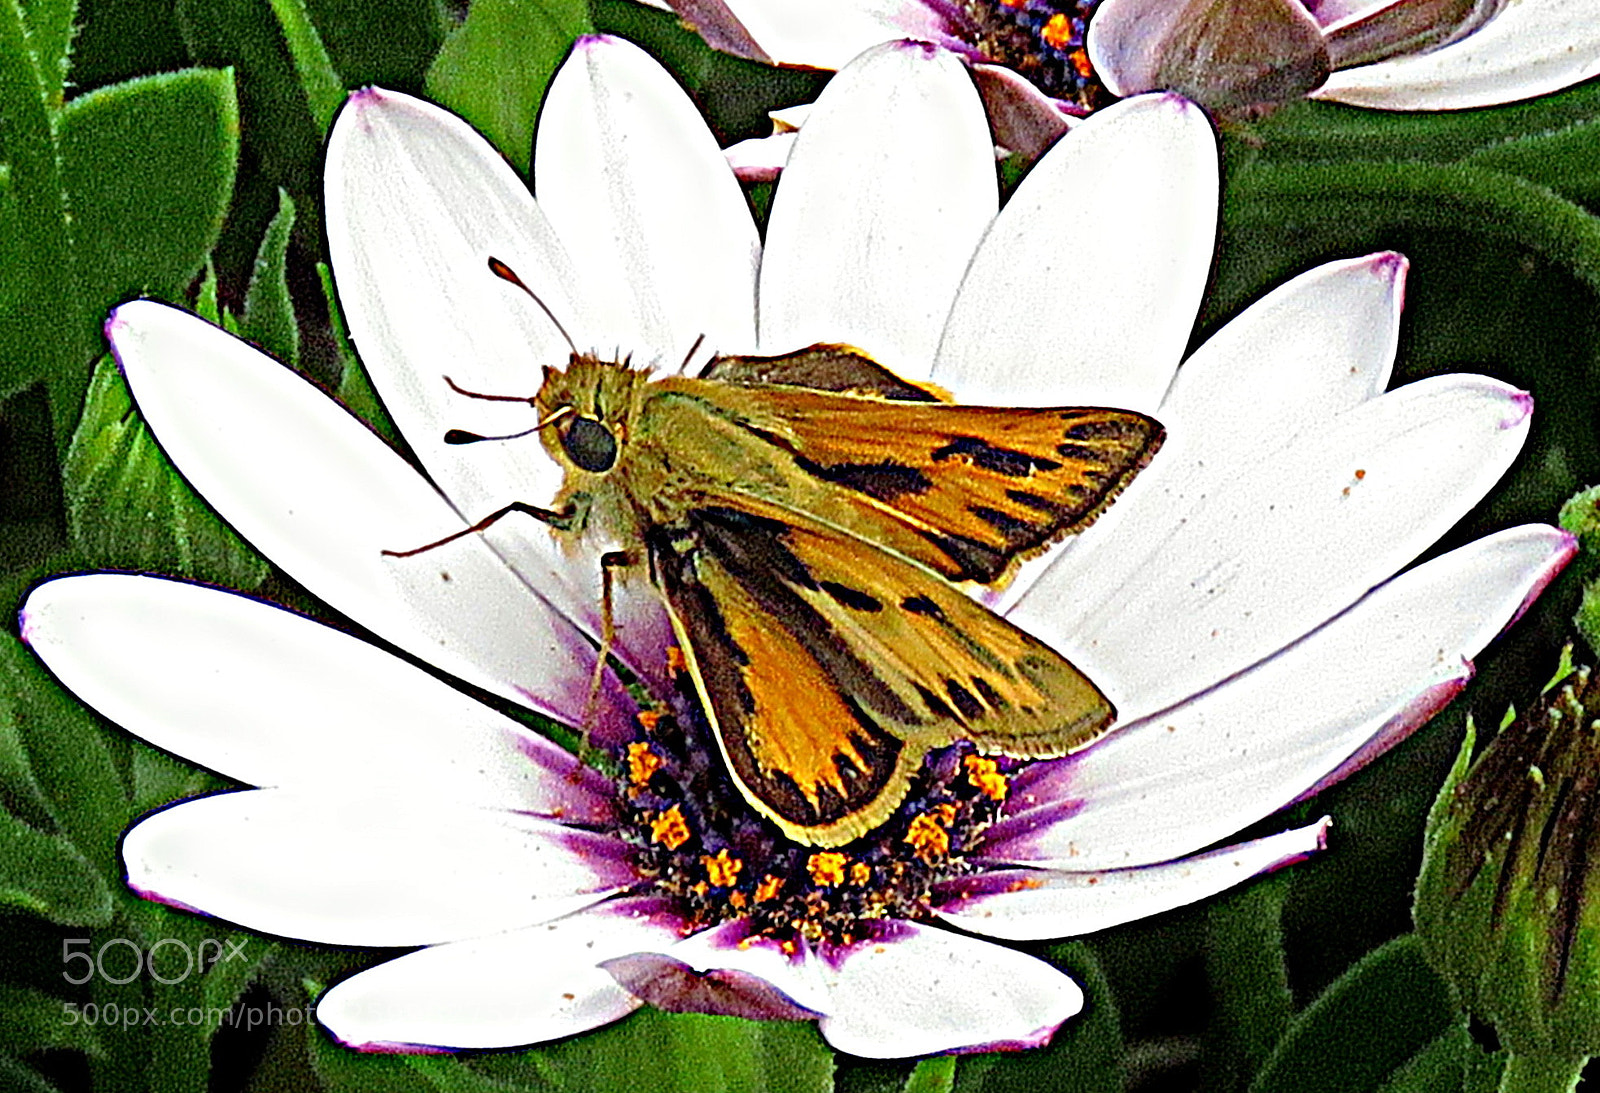 Canon PowerShot SX60 HS sample photo. A butterfly on a photography